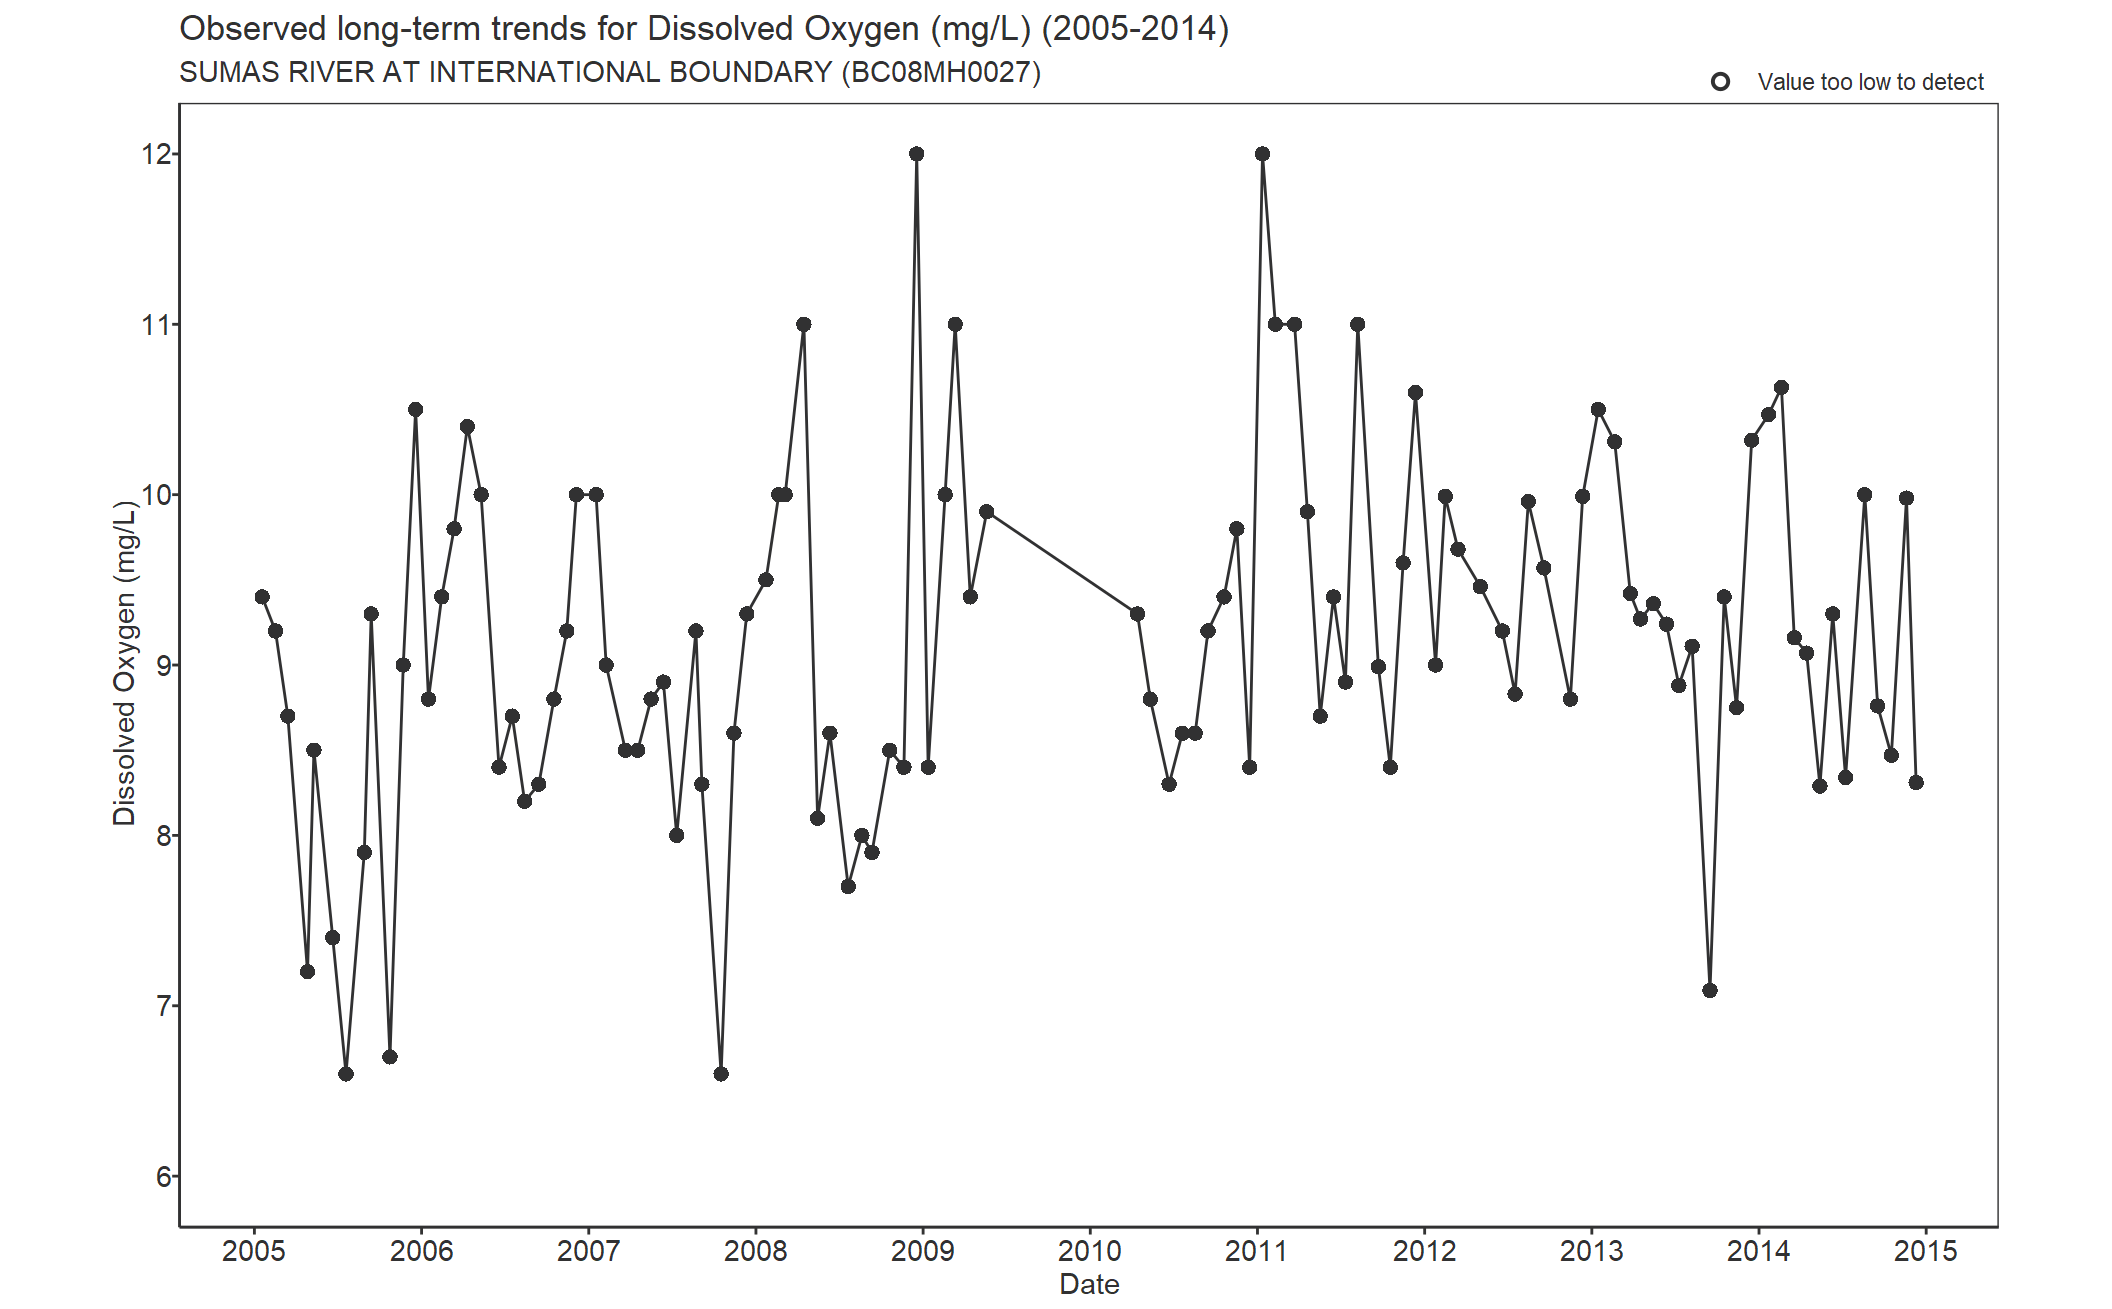 Observed long-term trends for Oxygen Dissolved (2005-2014)